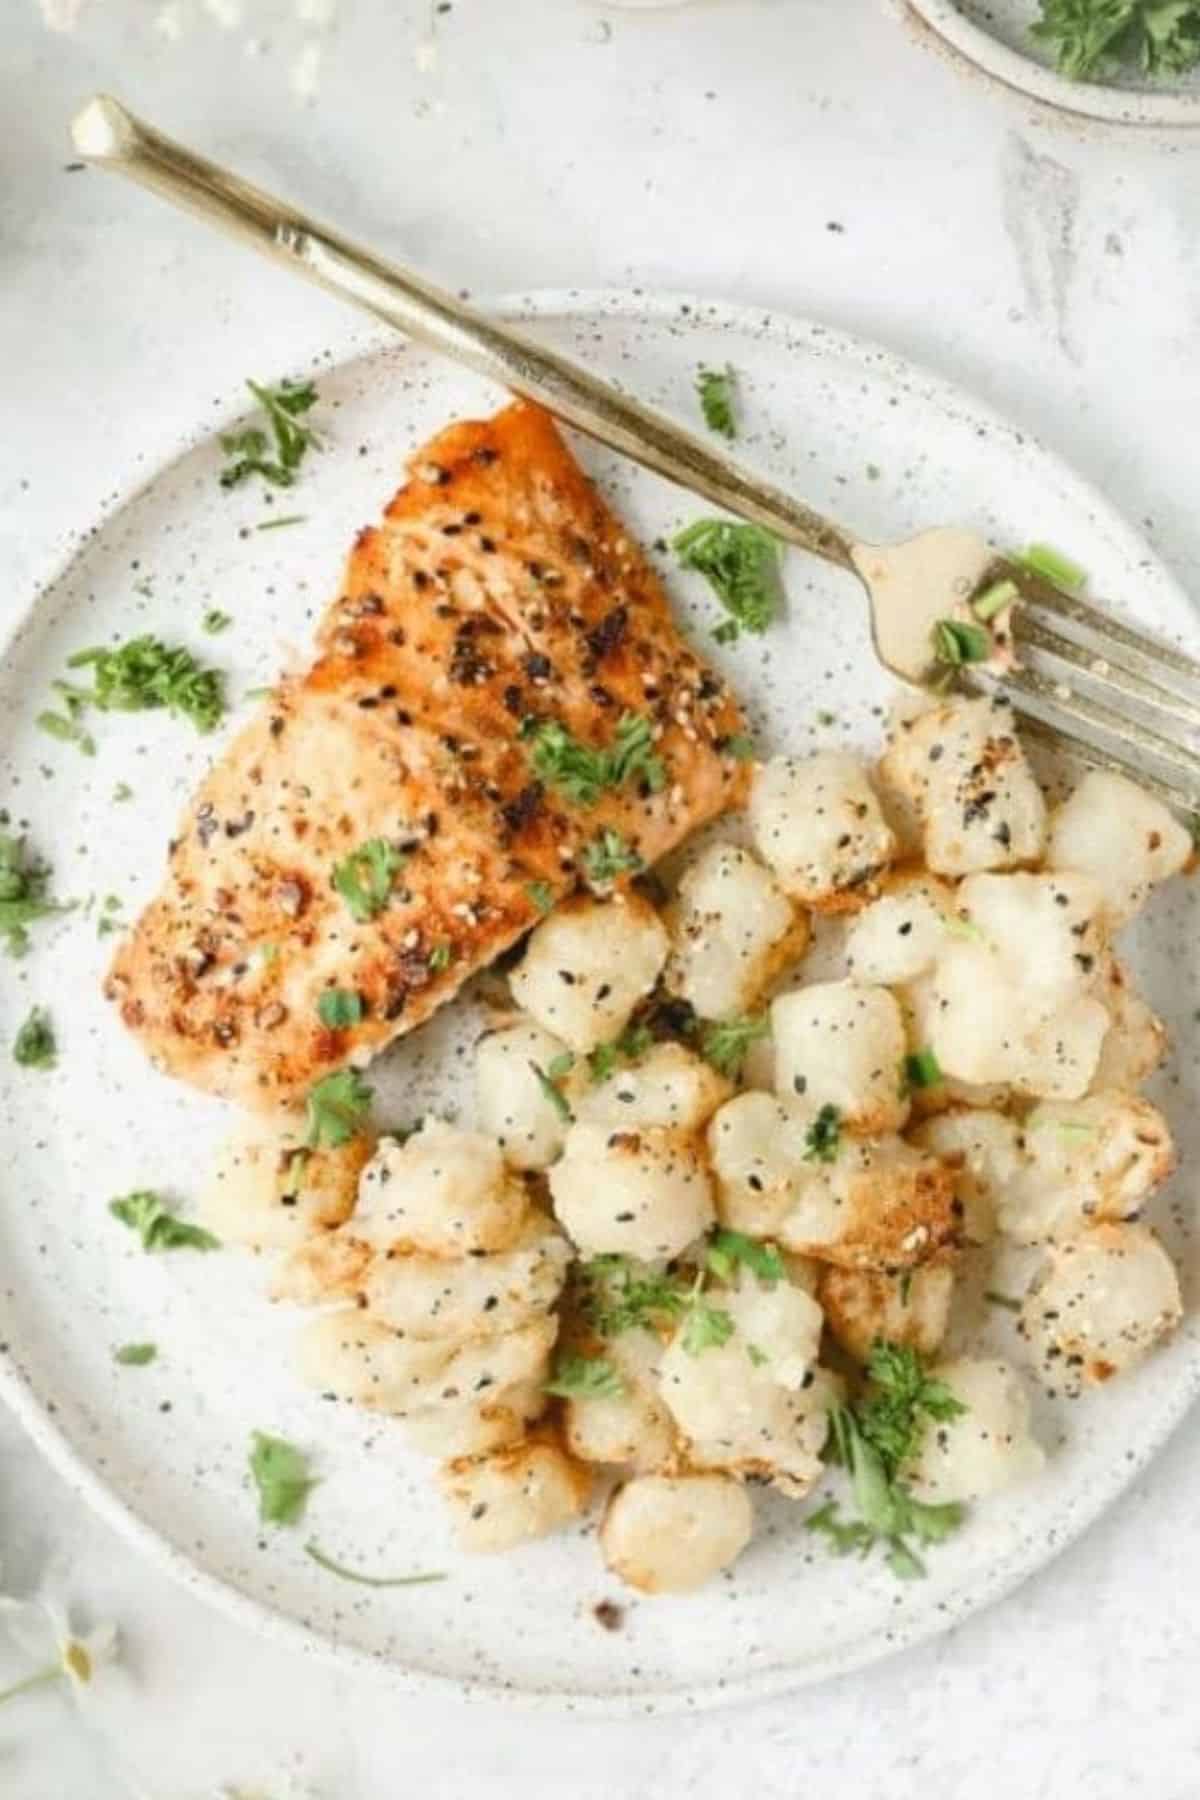 Fried Gnocchi And Salmon